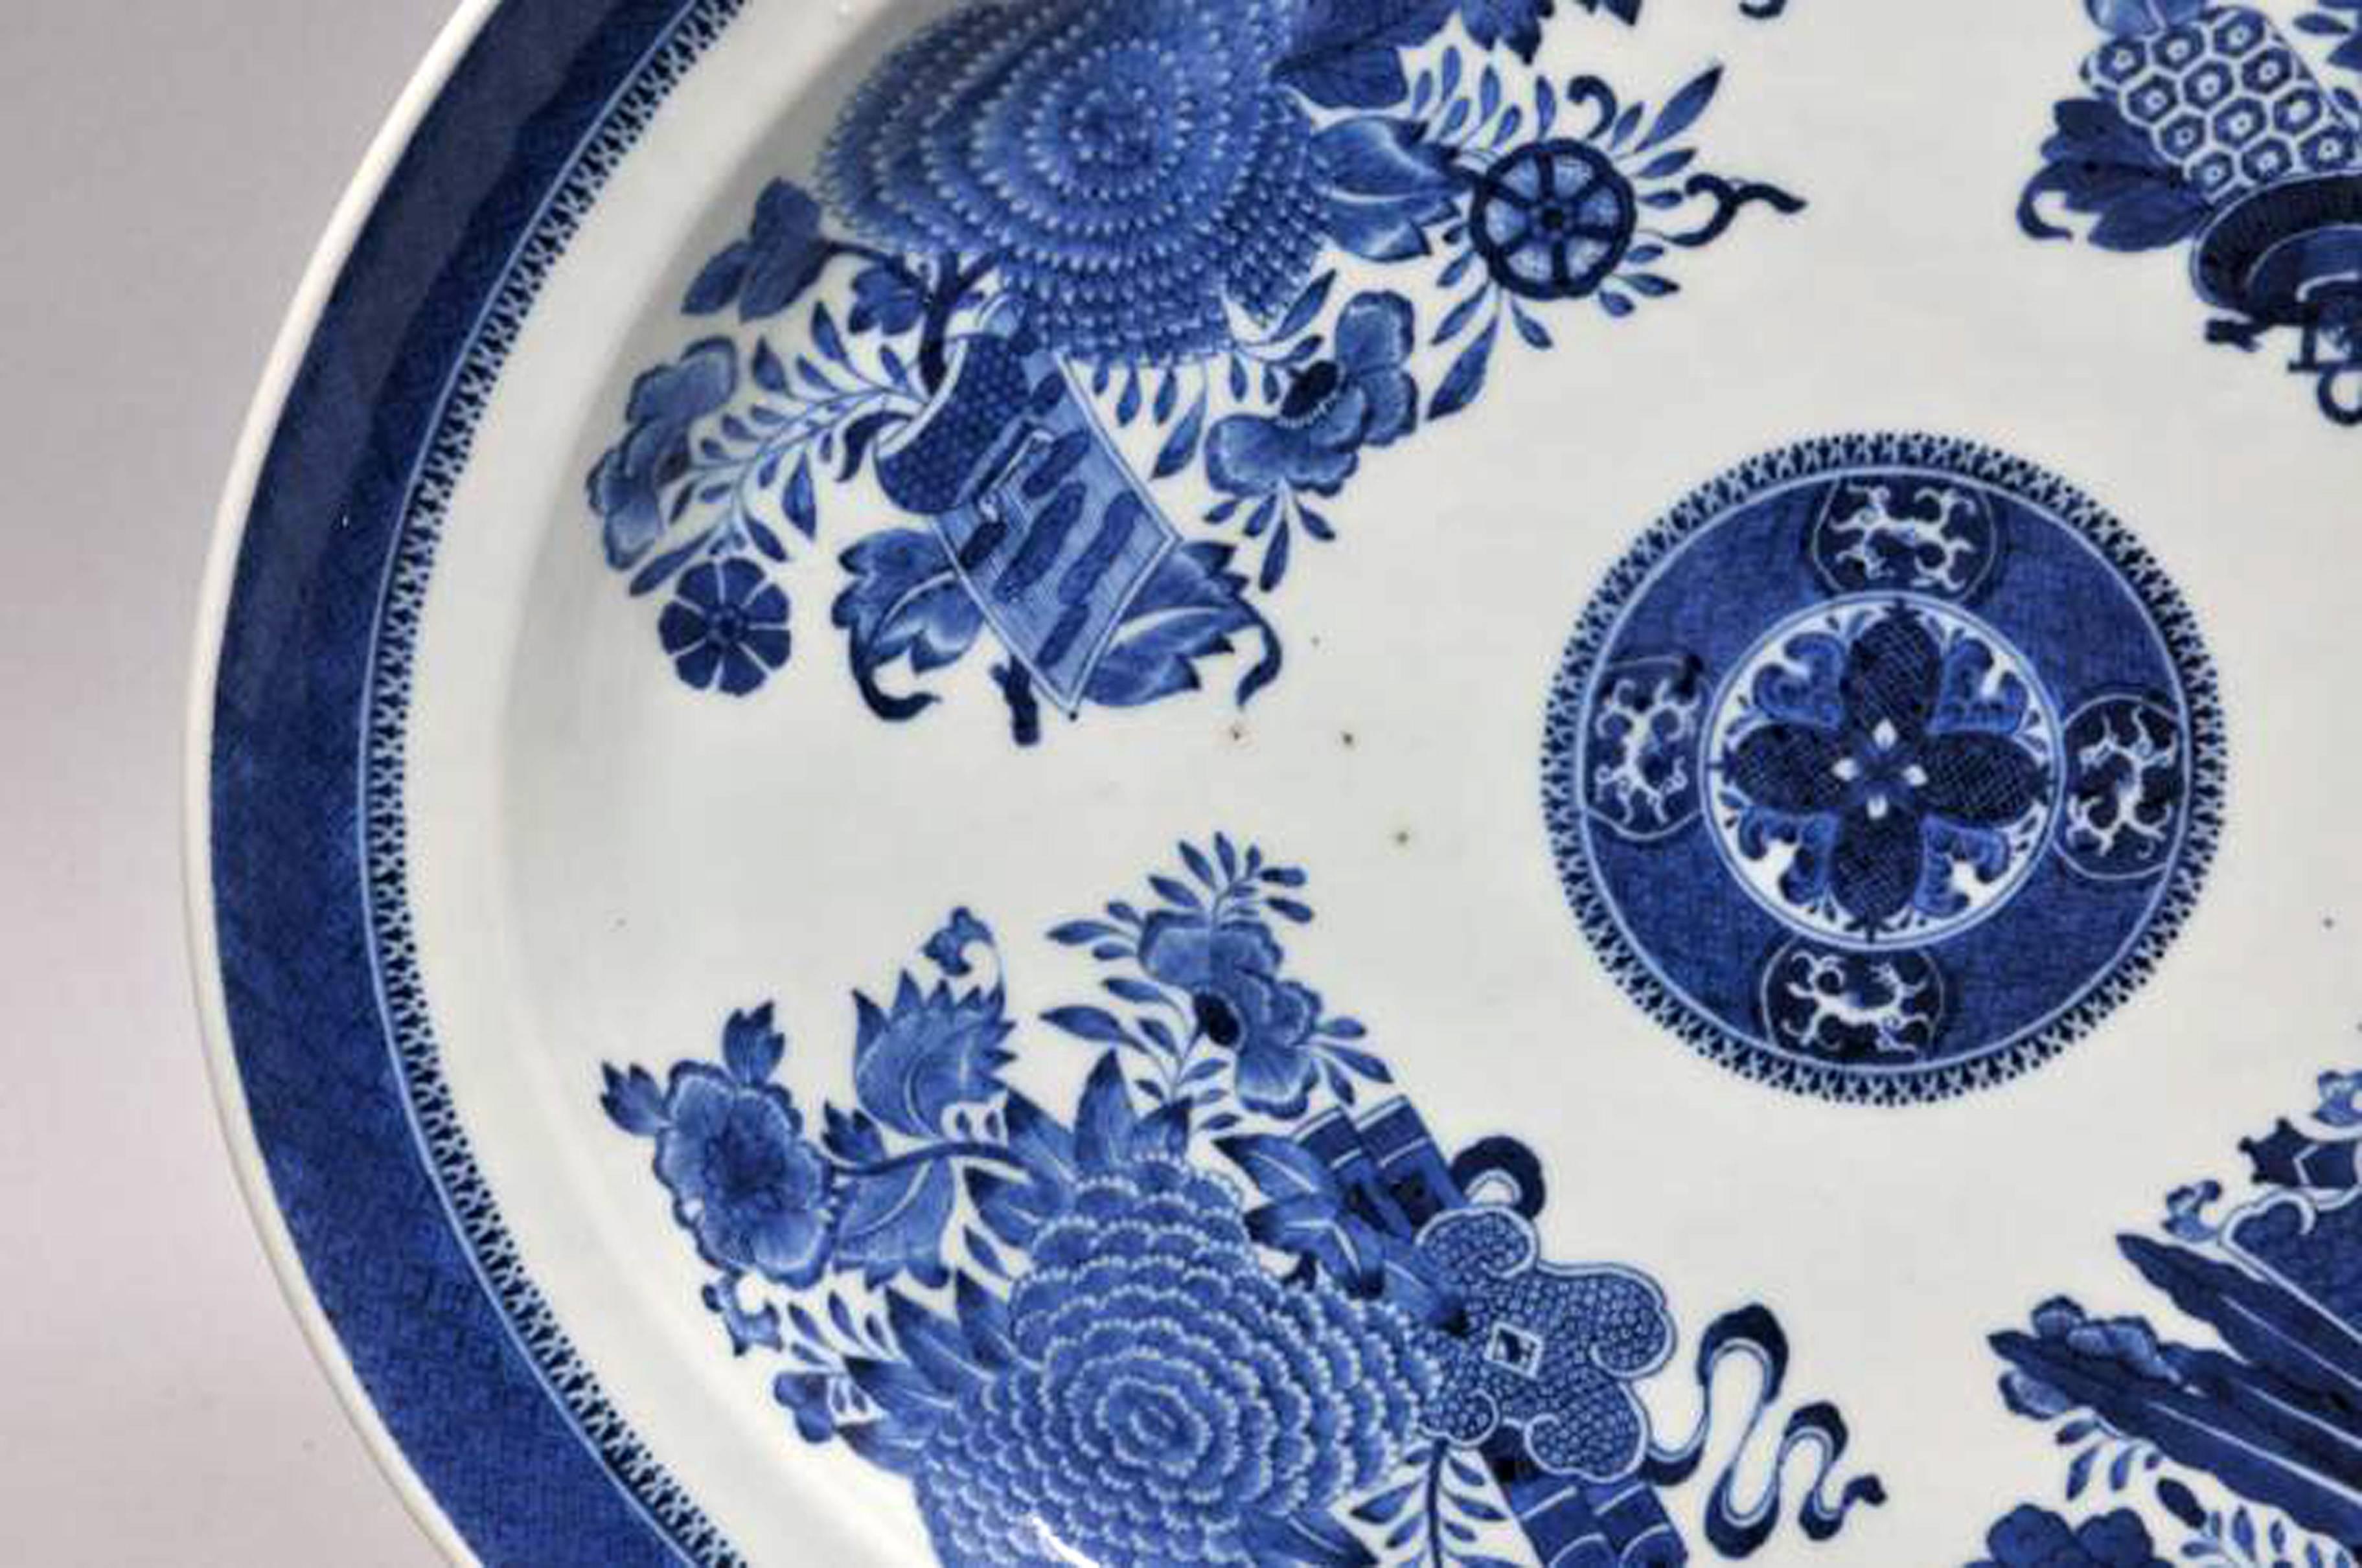 Chinese export porcelain large underglaze blue and white Fitzhugh dish,
circa 1790.

The large Chinese Export porcelain dish is of oval form and painted with the traditional Fitzhugh design.

